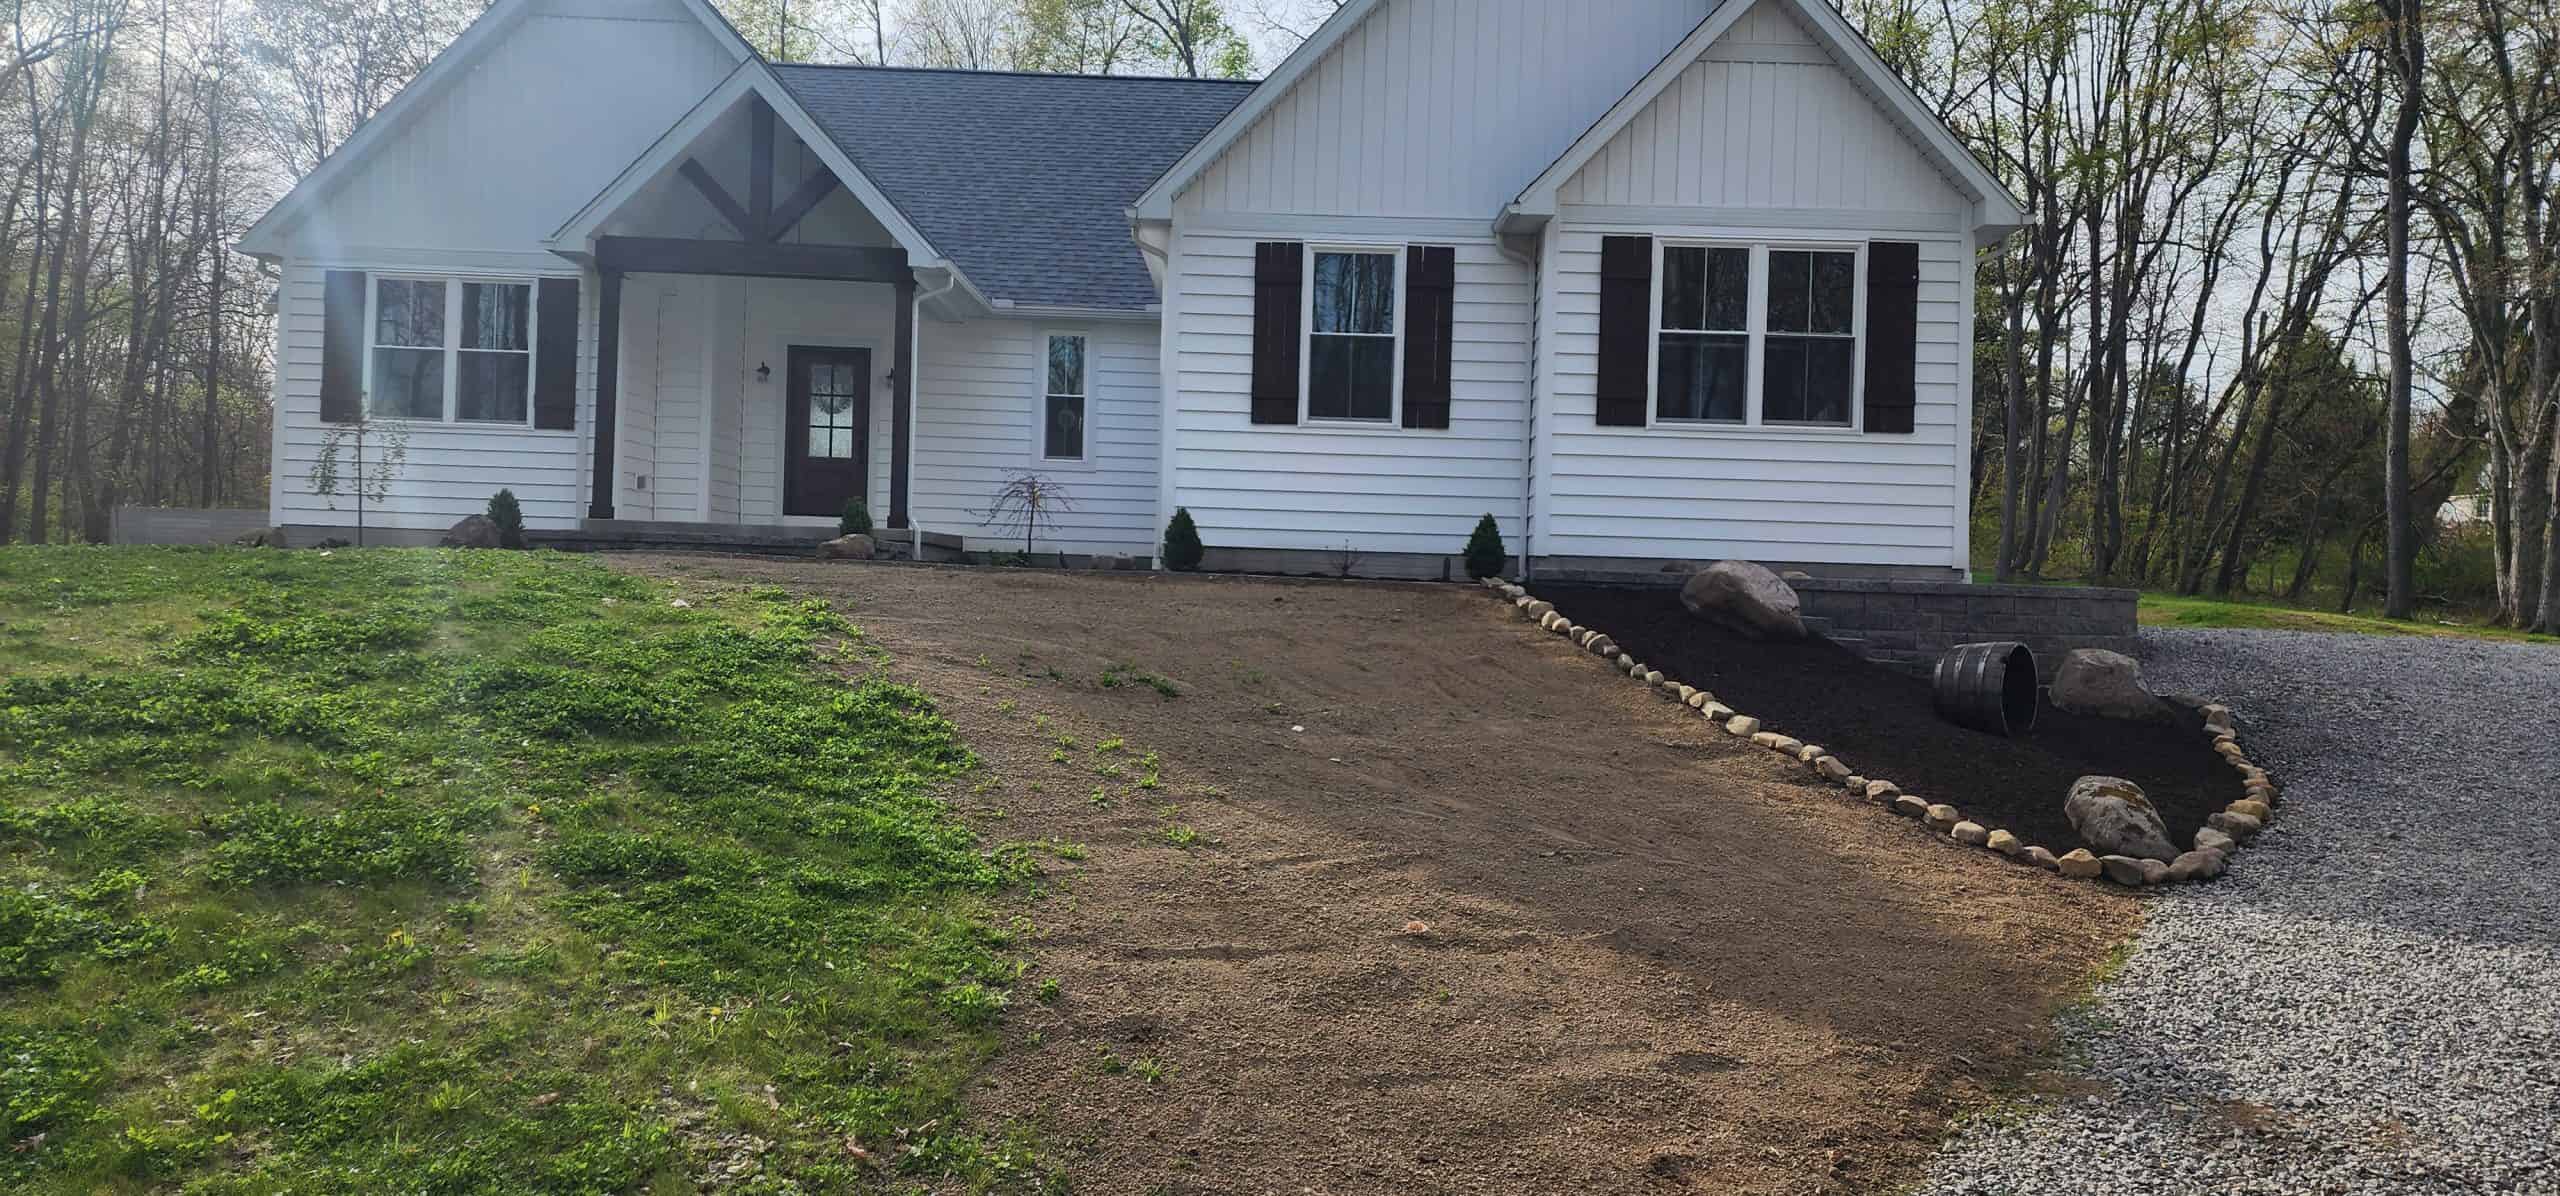 Install mulch for more than aesthetics; improve your home’s functionality